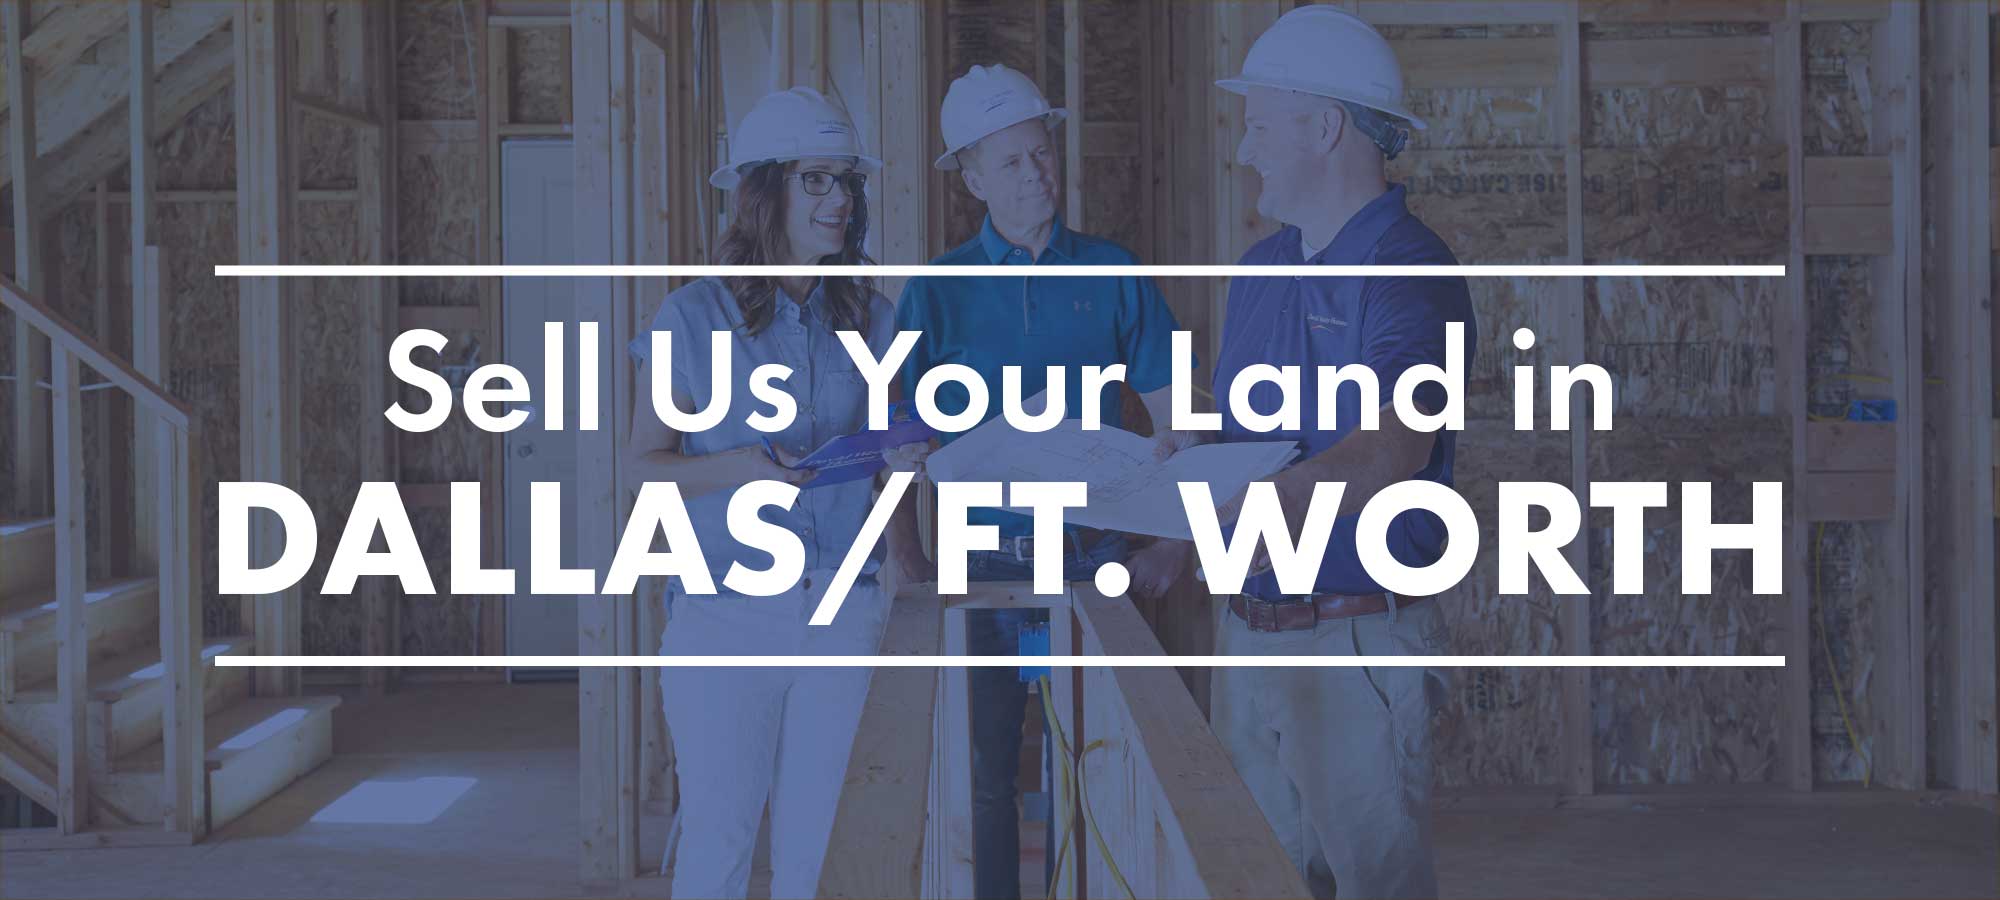 Sell Us Your Land in Dallas/Ft. Worth